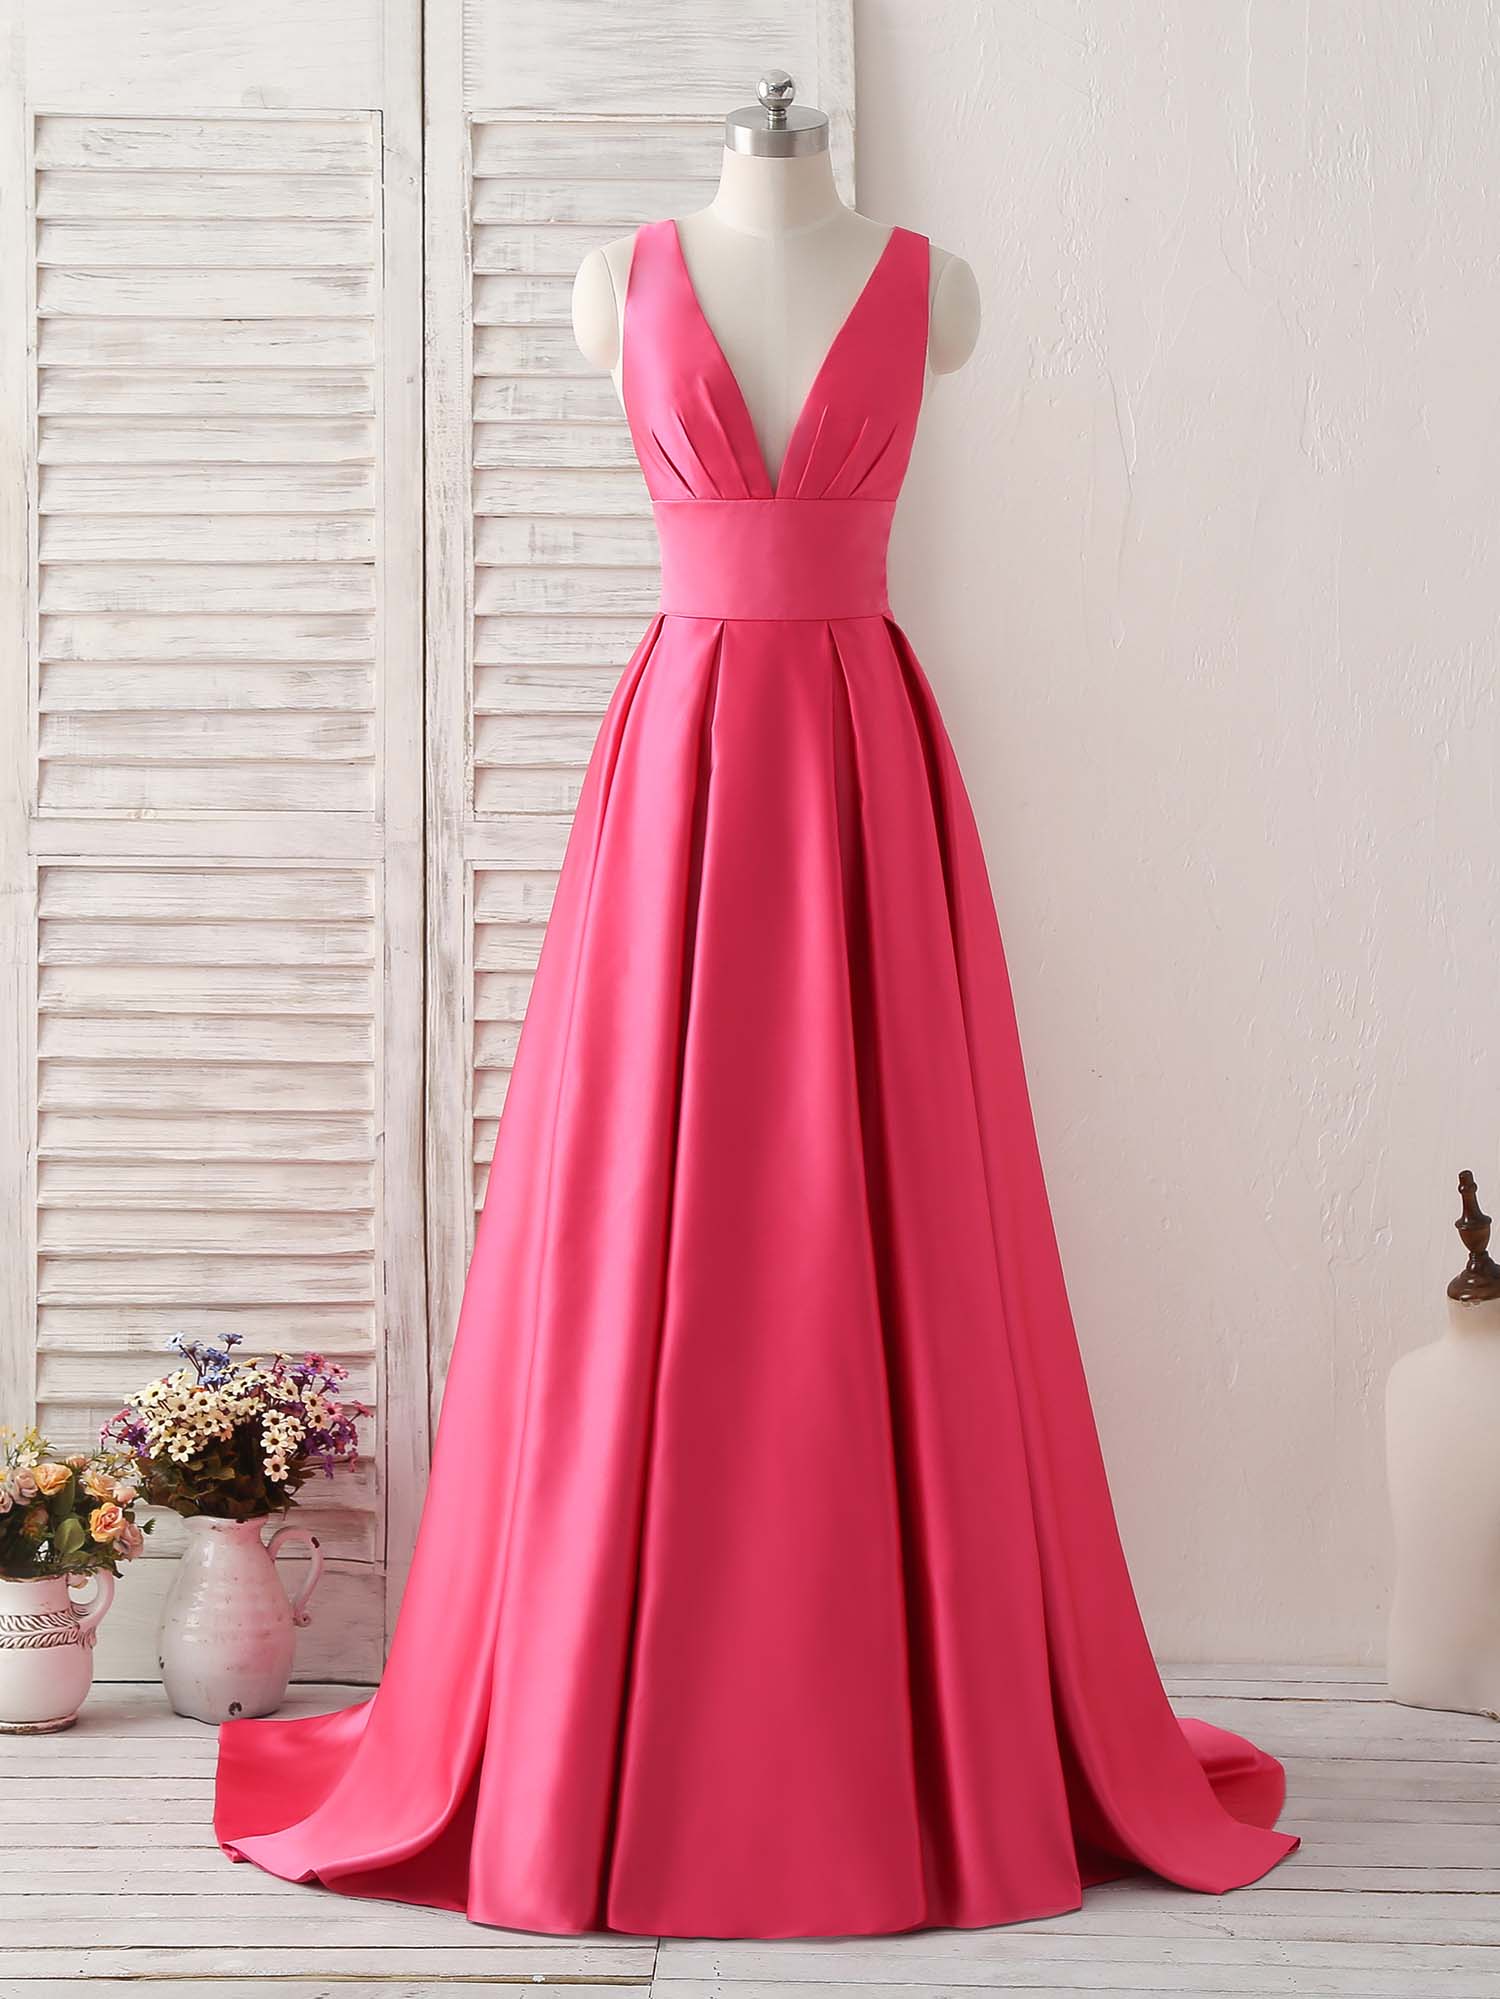 Simple V Neck Long Prom Dress Outfits For Women Backless Evening Dress